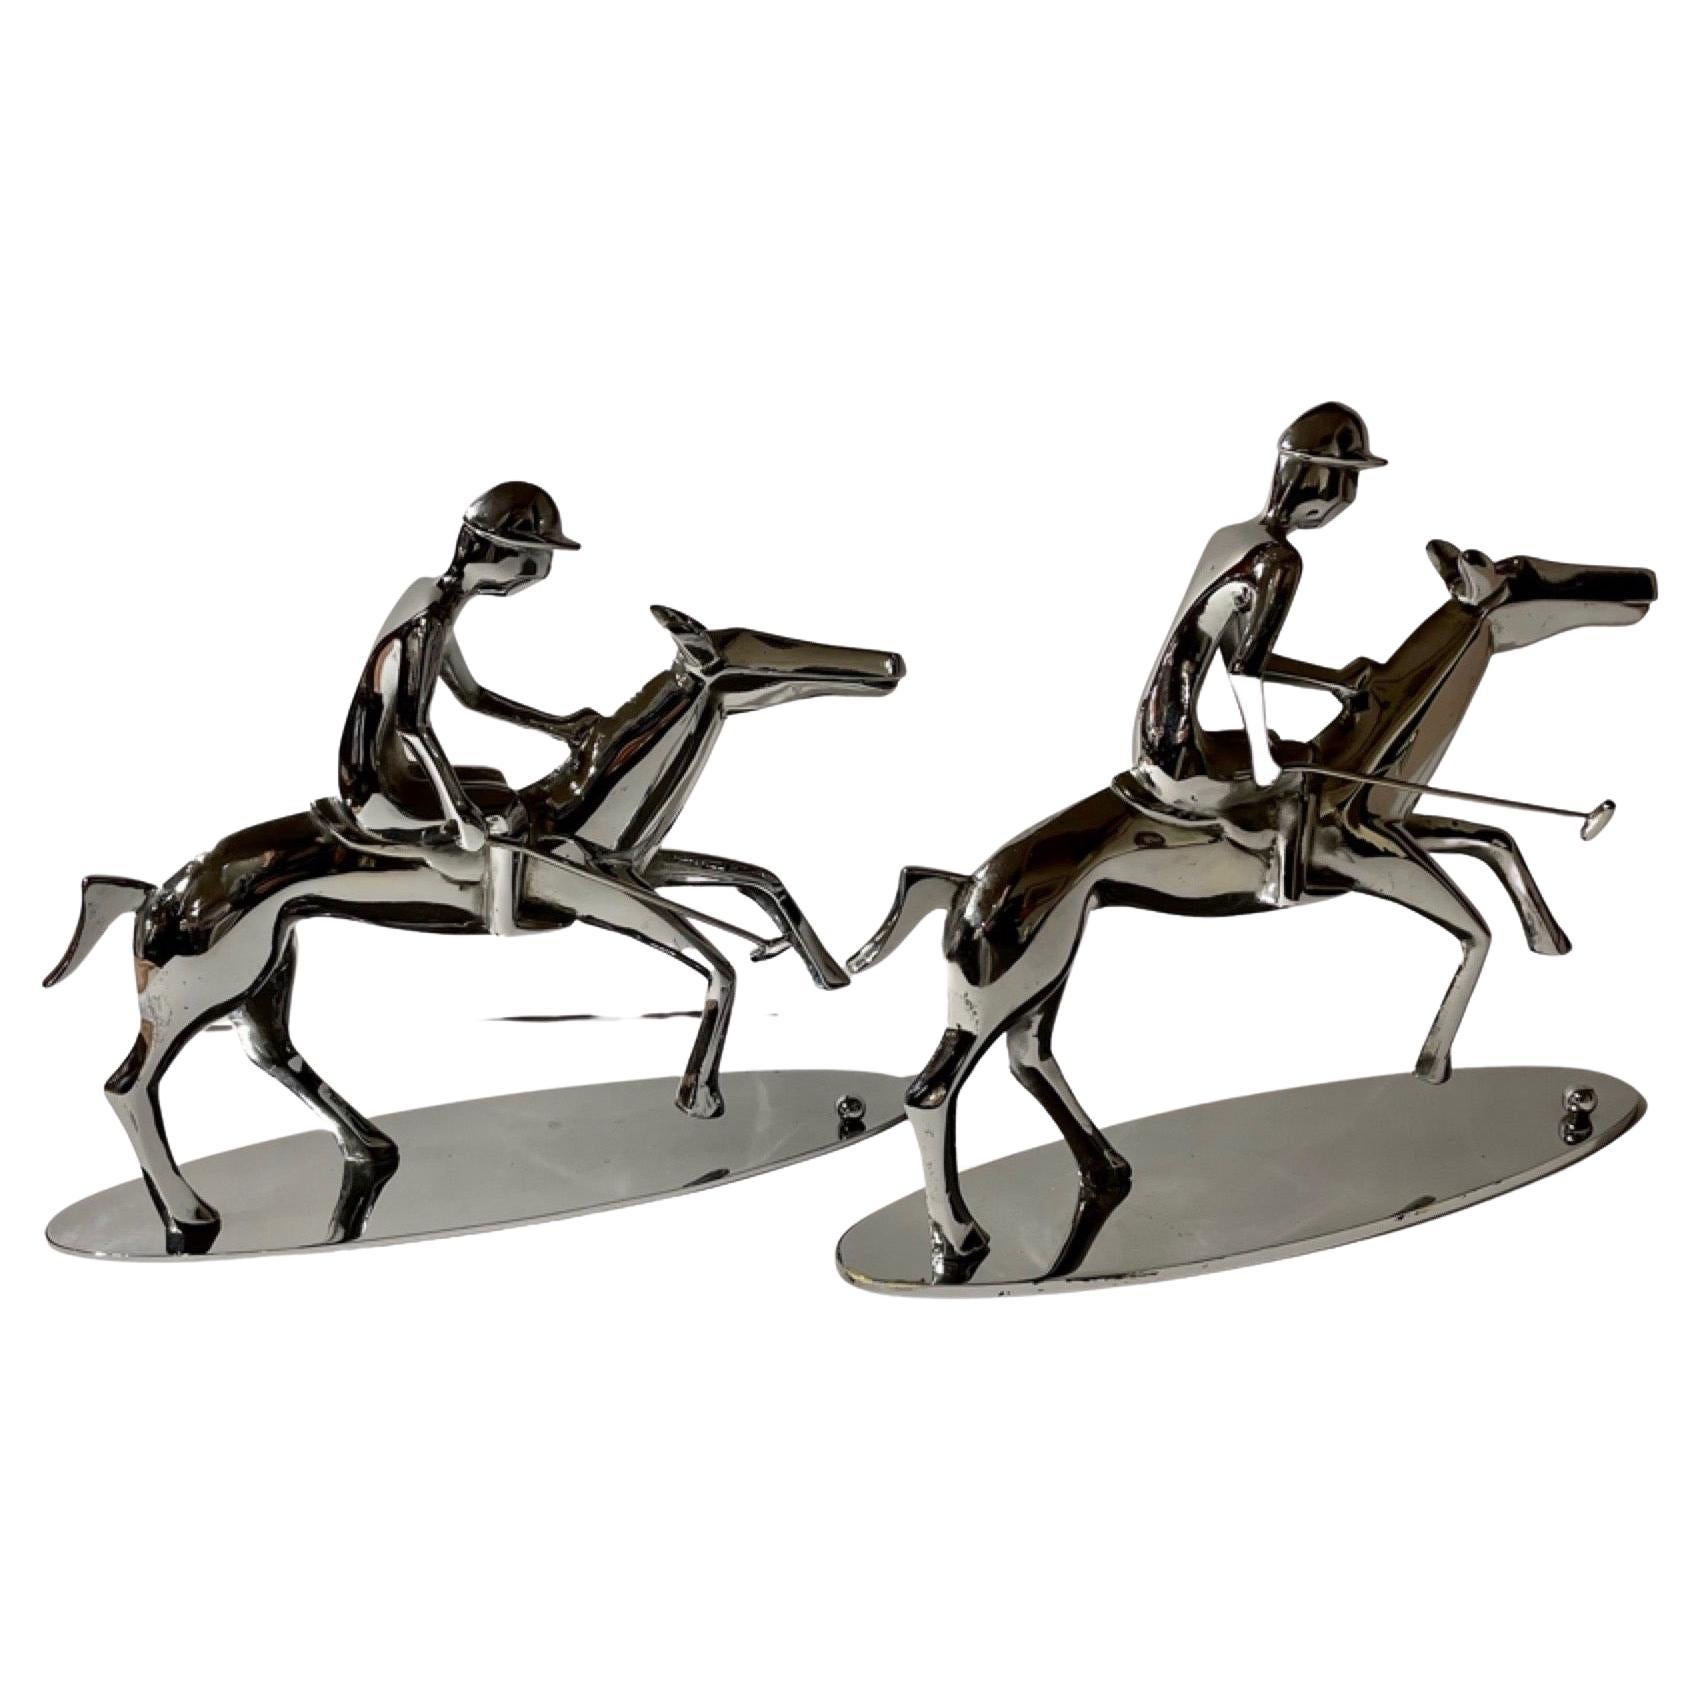 Hagenauer Polo Players Mounted on Horse Pair Wien